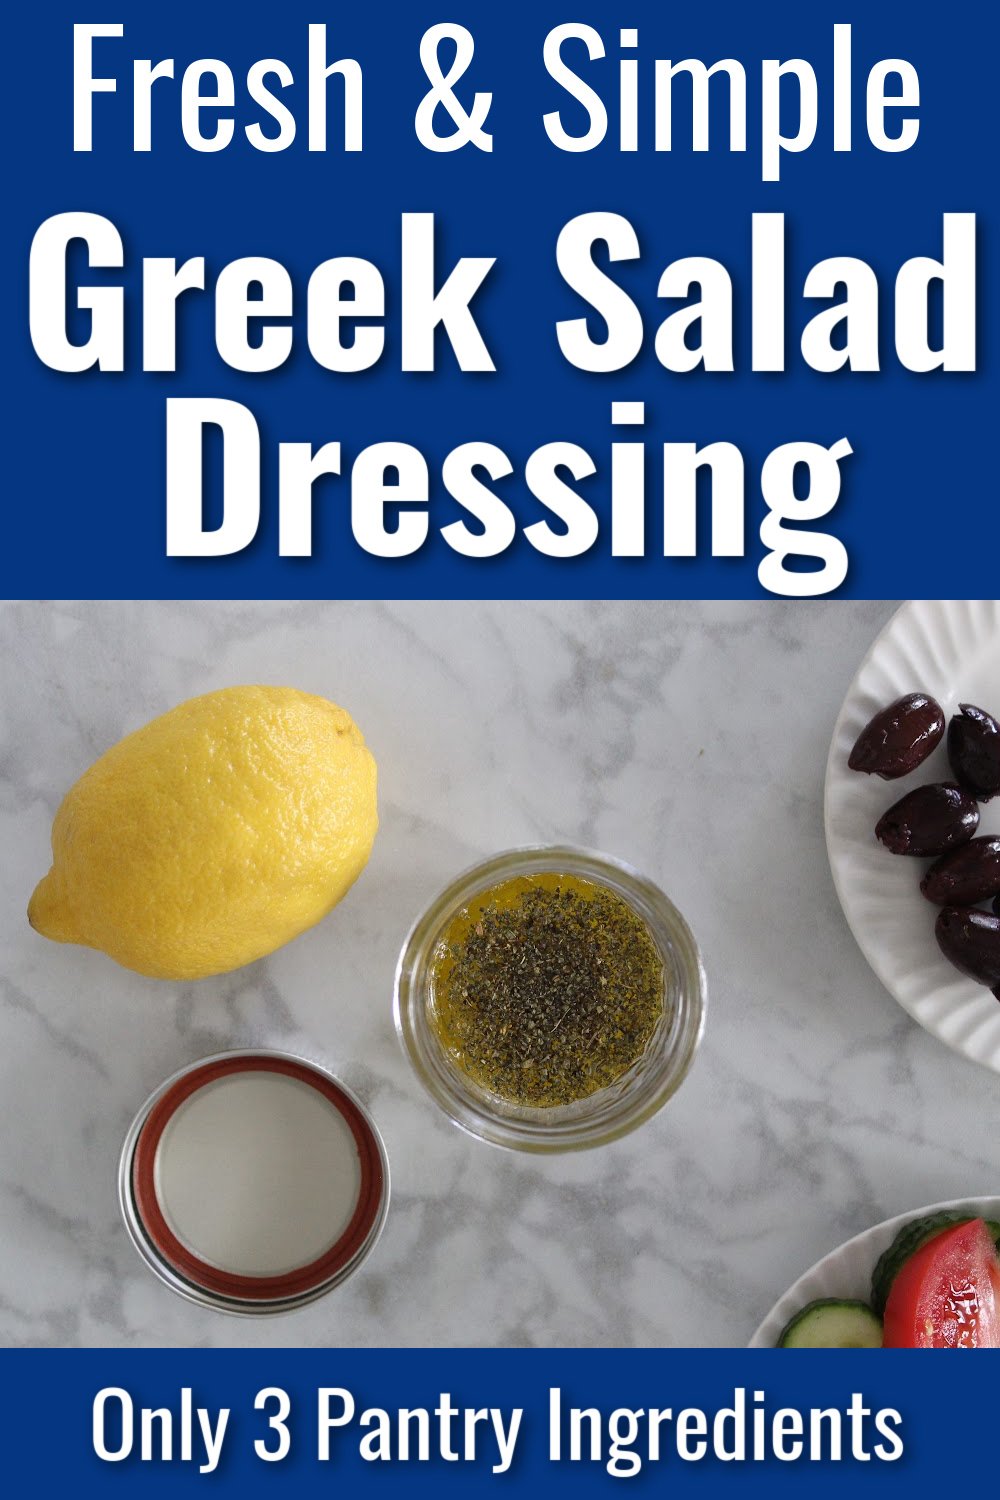 A jar of greek salad dressing with a lemon, olives and sliced tomato at the side. Text overlay states fresh and simple greek salad dressing.